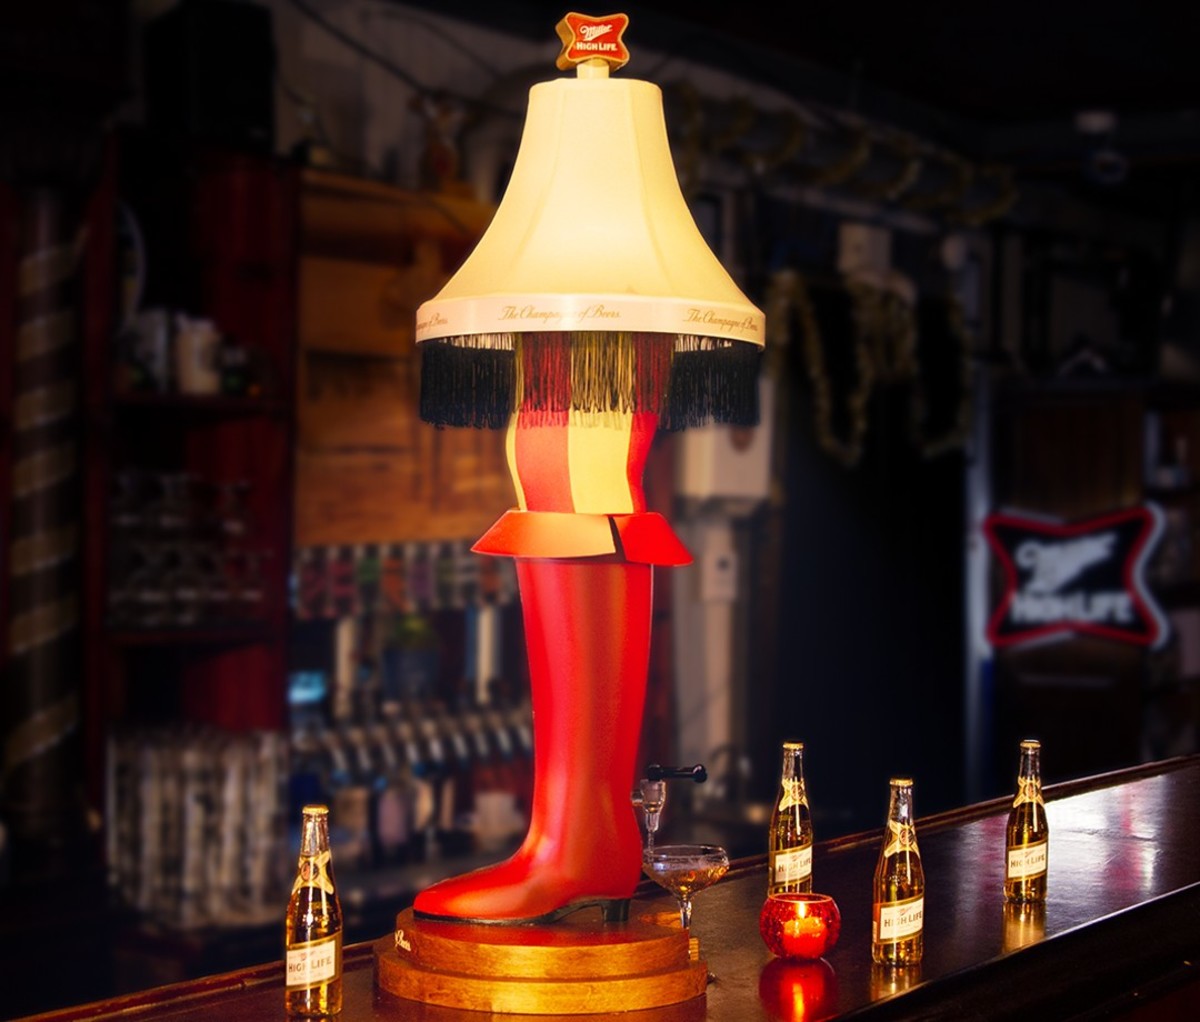 The High Life Leg Lamp Beer Tower in a bar